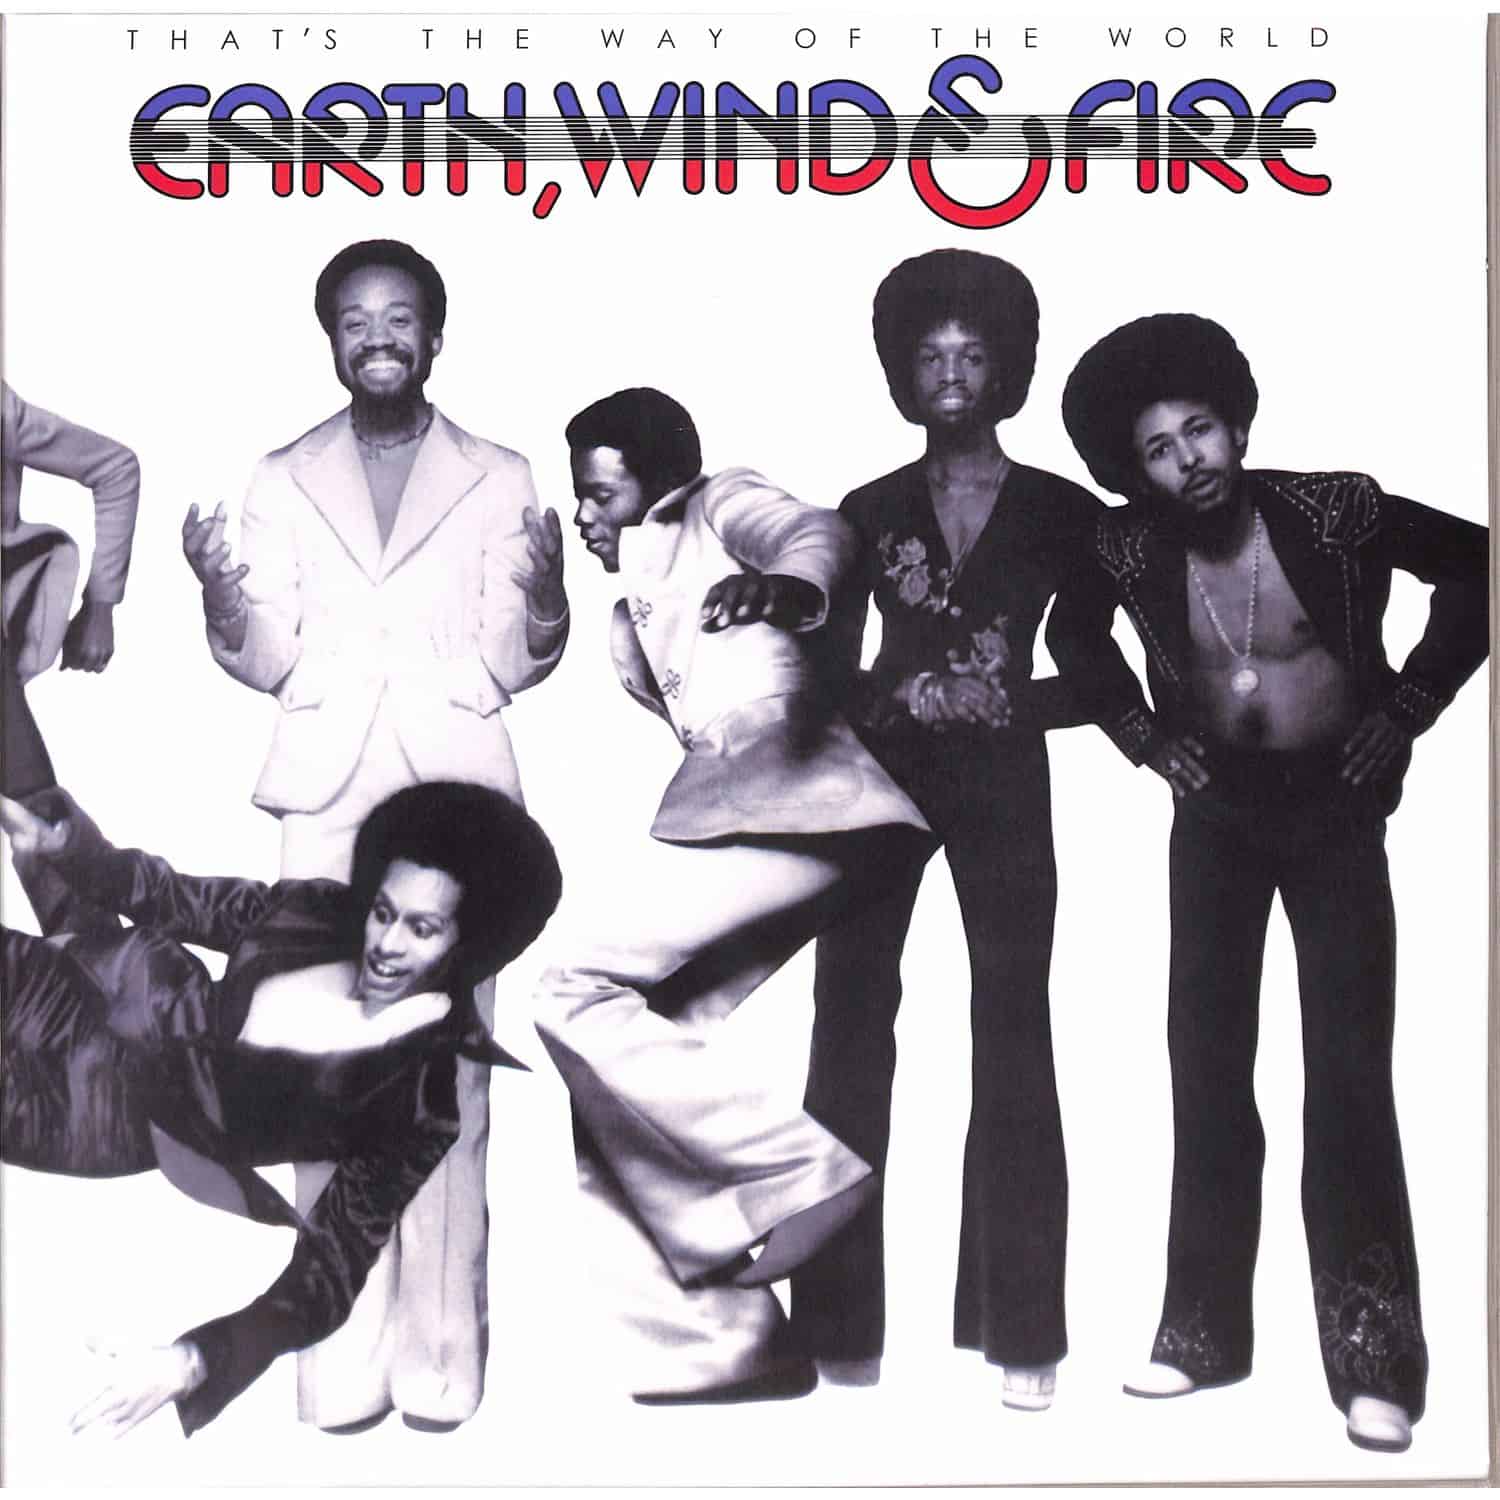 Earth Wind Fire - THATS THE WAY OF THE WORLD